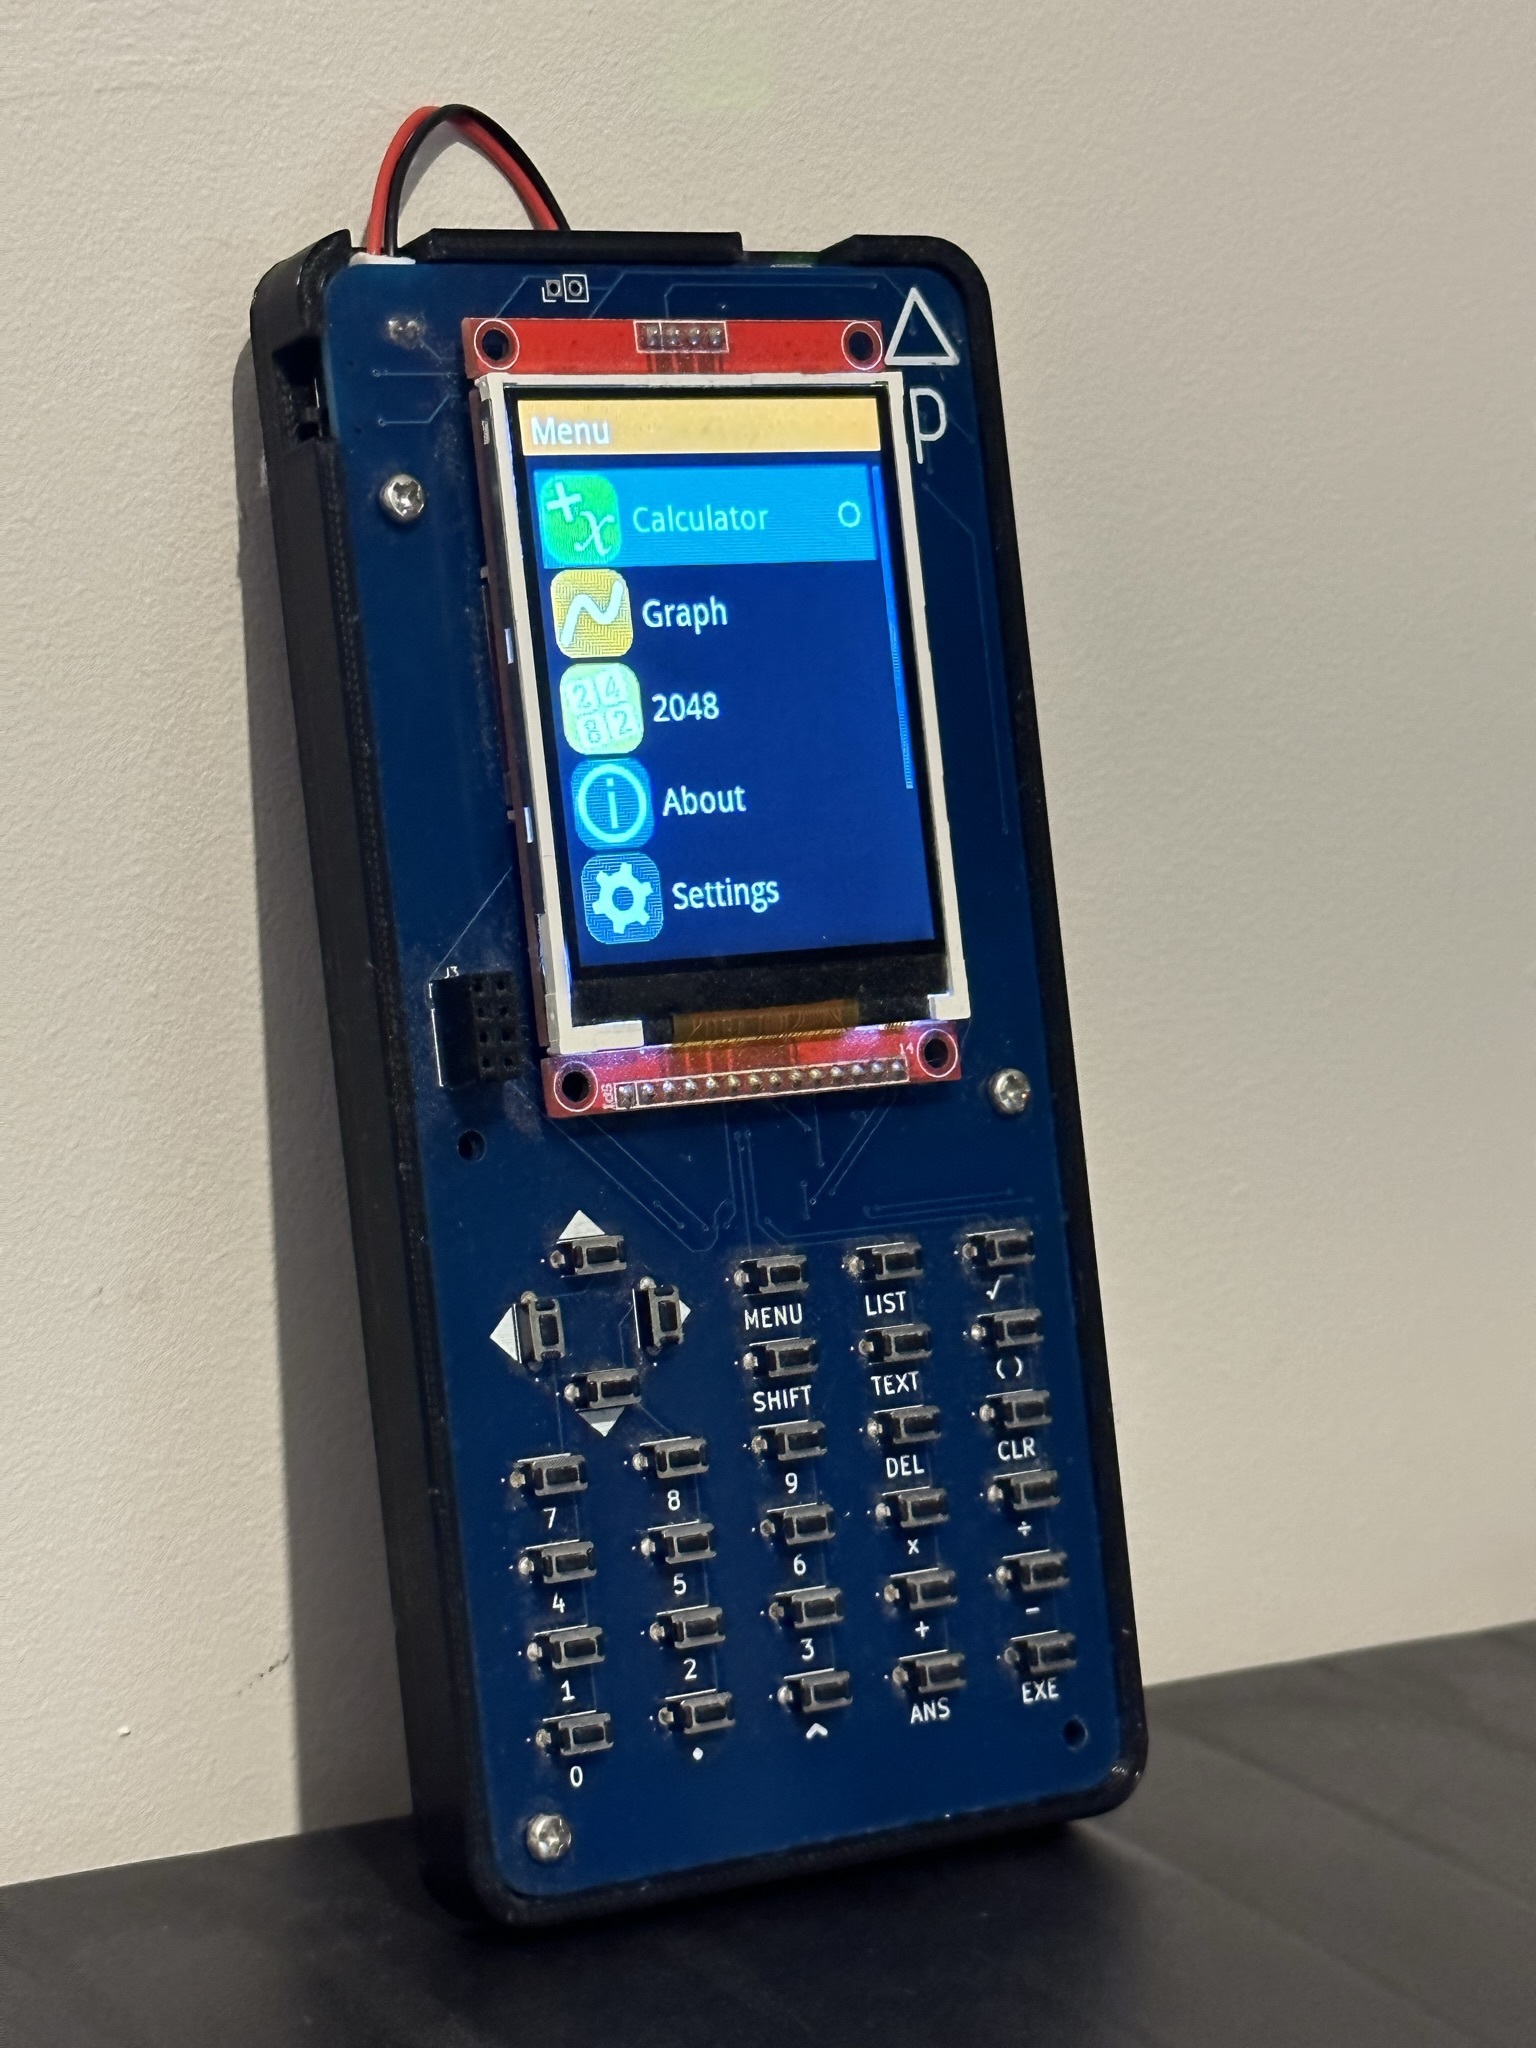 The Delta Pico. Built on a blue PCB inside a black 3D-printed case, there is a 2.8" TFT display showing a main menu, below which lies a keypad of tactile buttons.